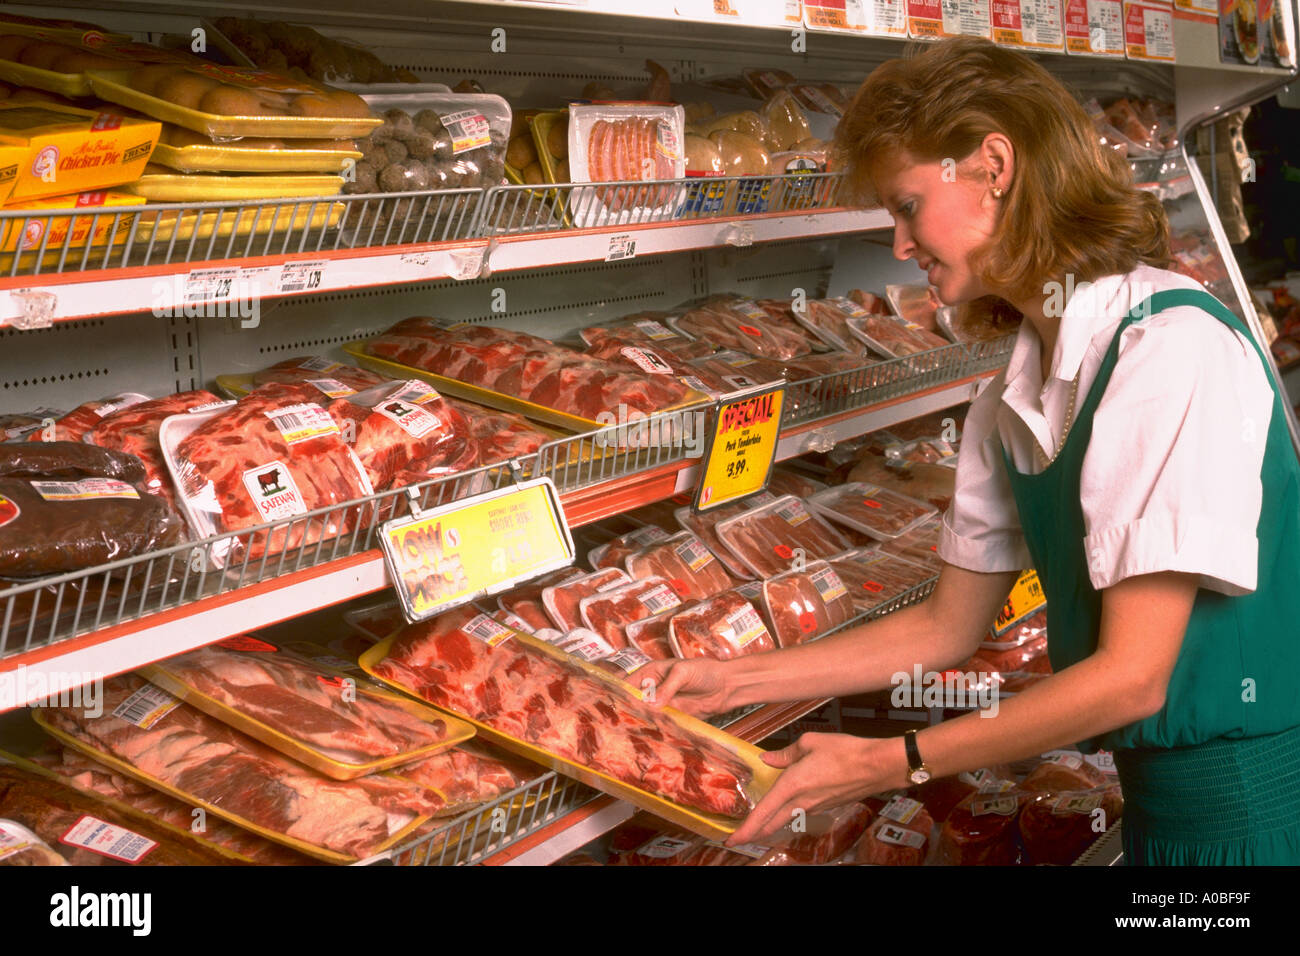 Woman buys meat at supermarket released CF26336 Stock Photo